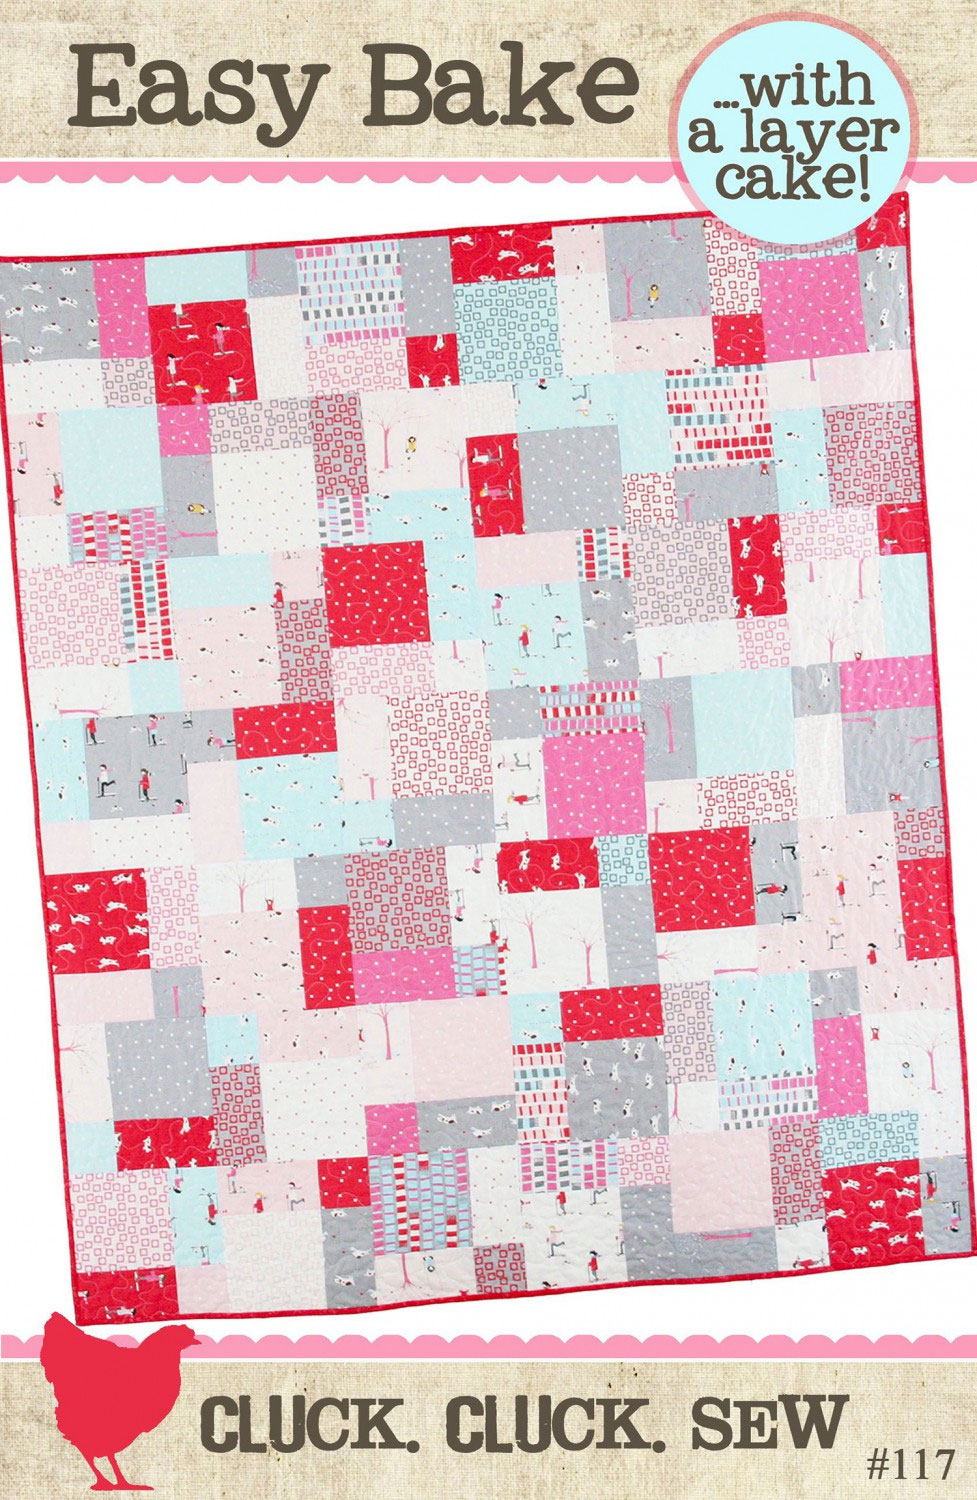 Easy-Bake-quilt-sewing-pattern-Cluck-Cluck-Sew-front